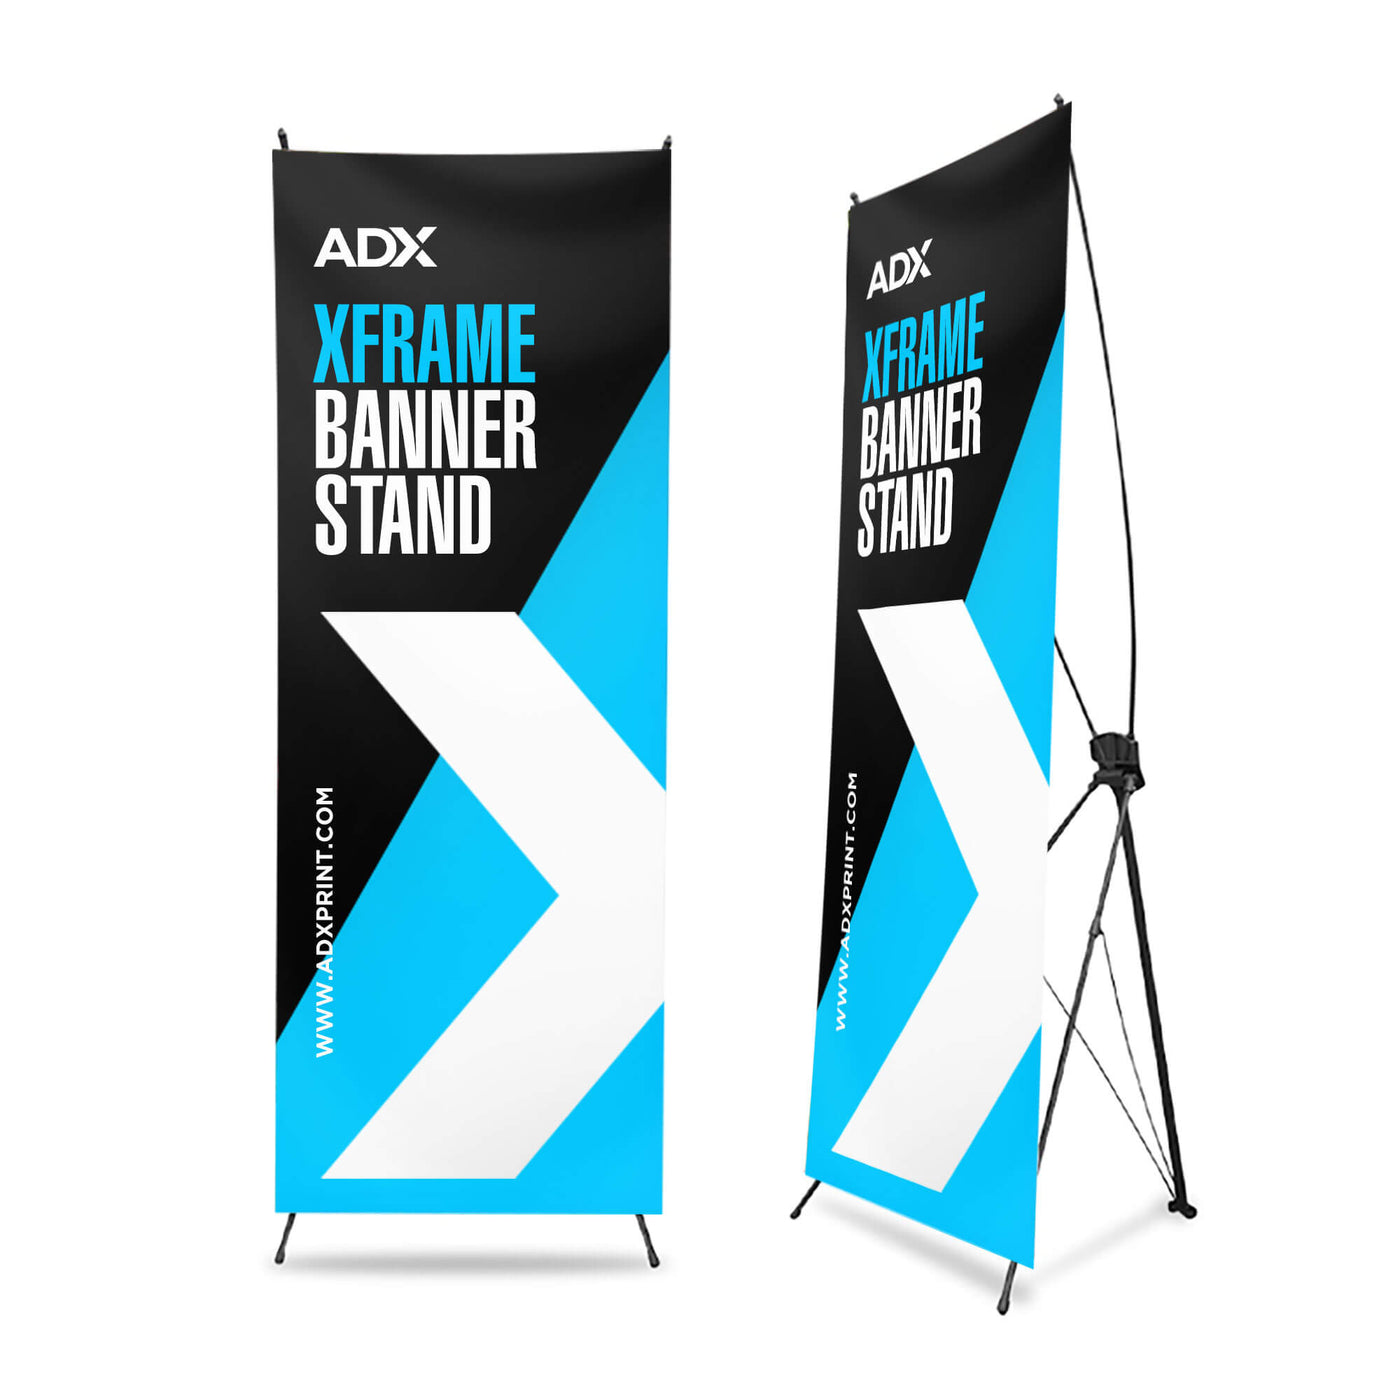 X Frame Banner Stand printing